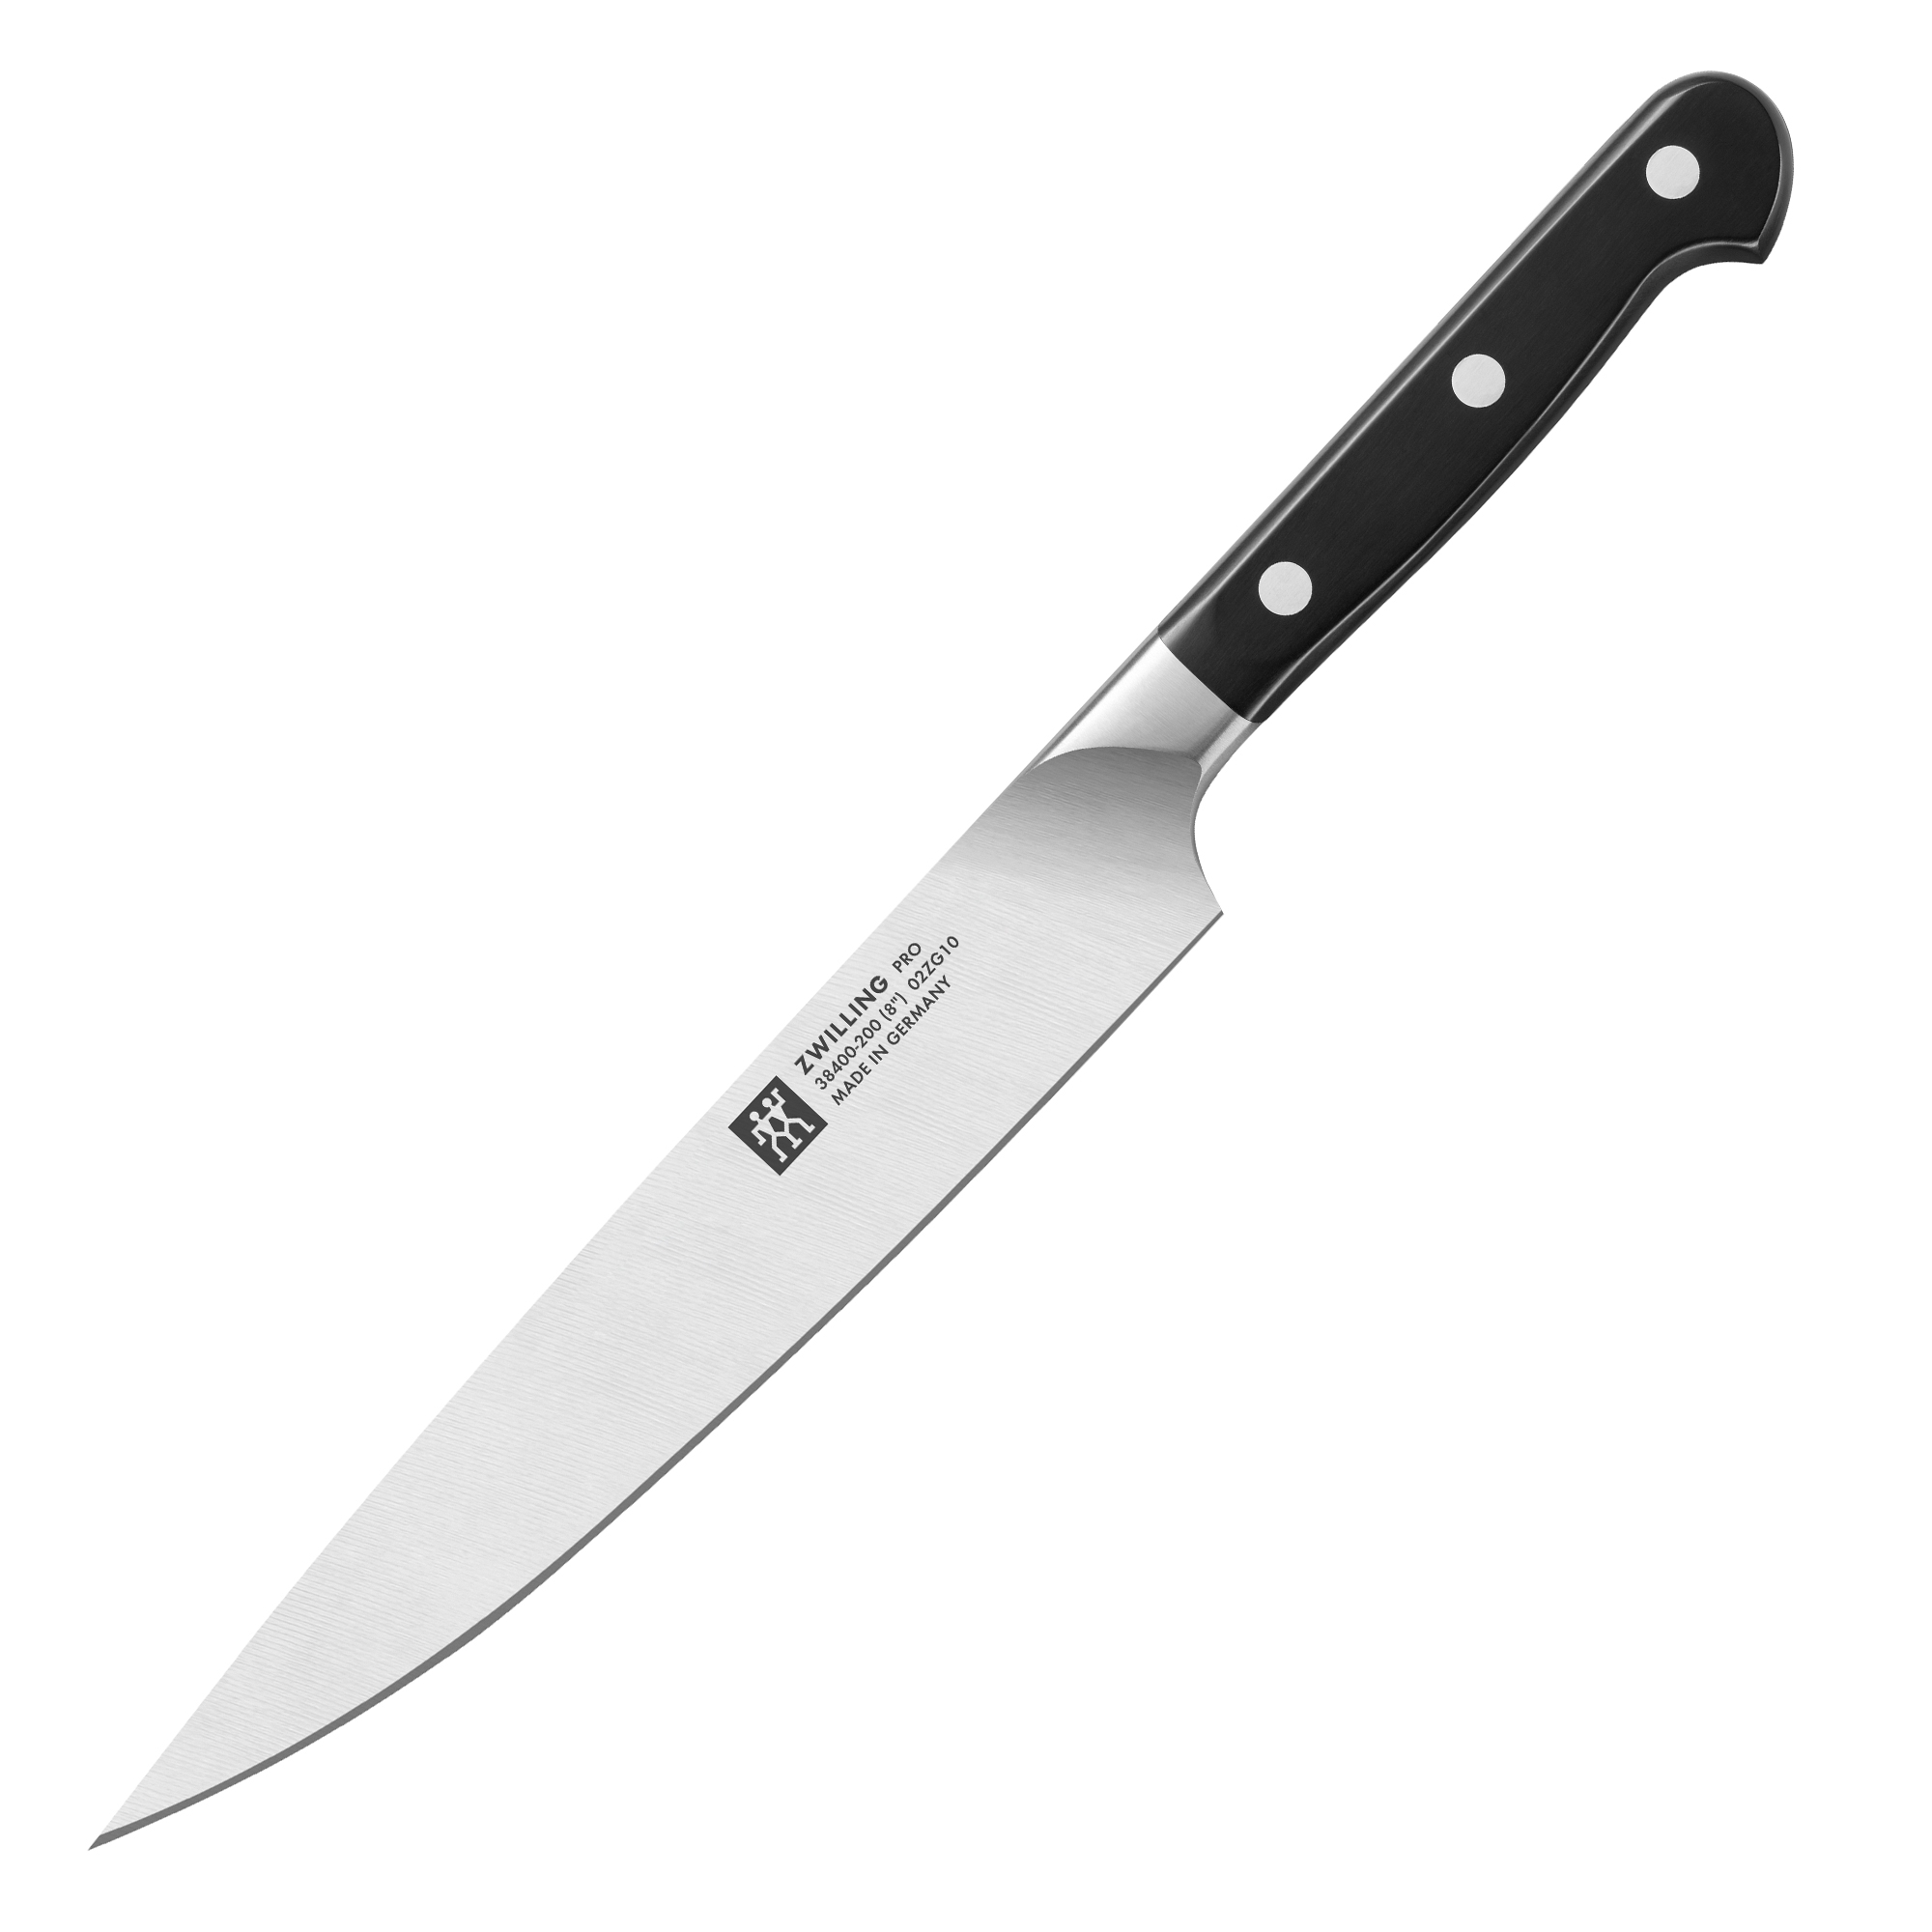 Zwilling - Pro - Carving knife 20 cm